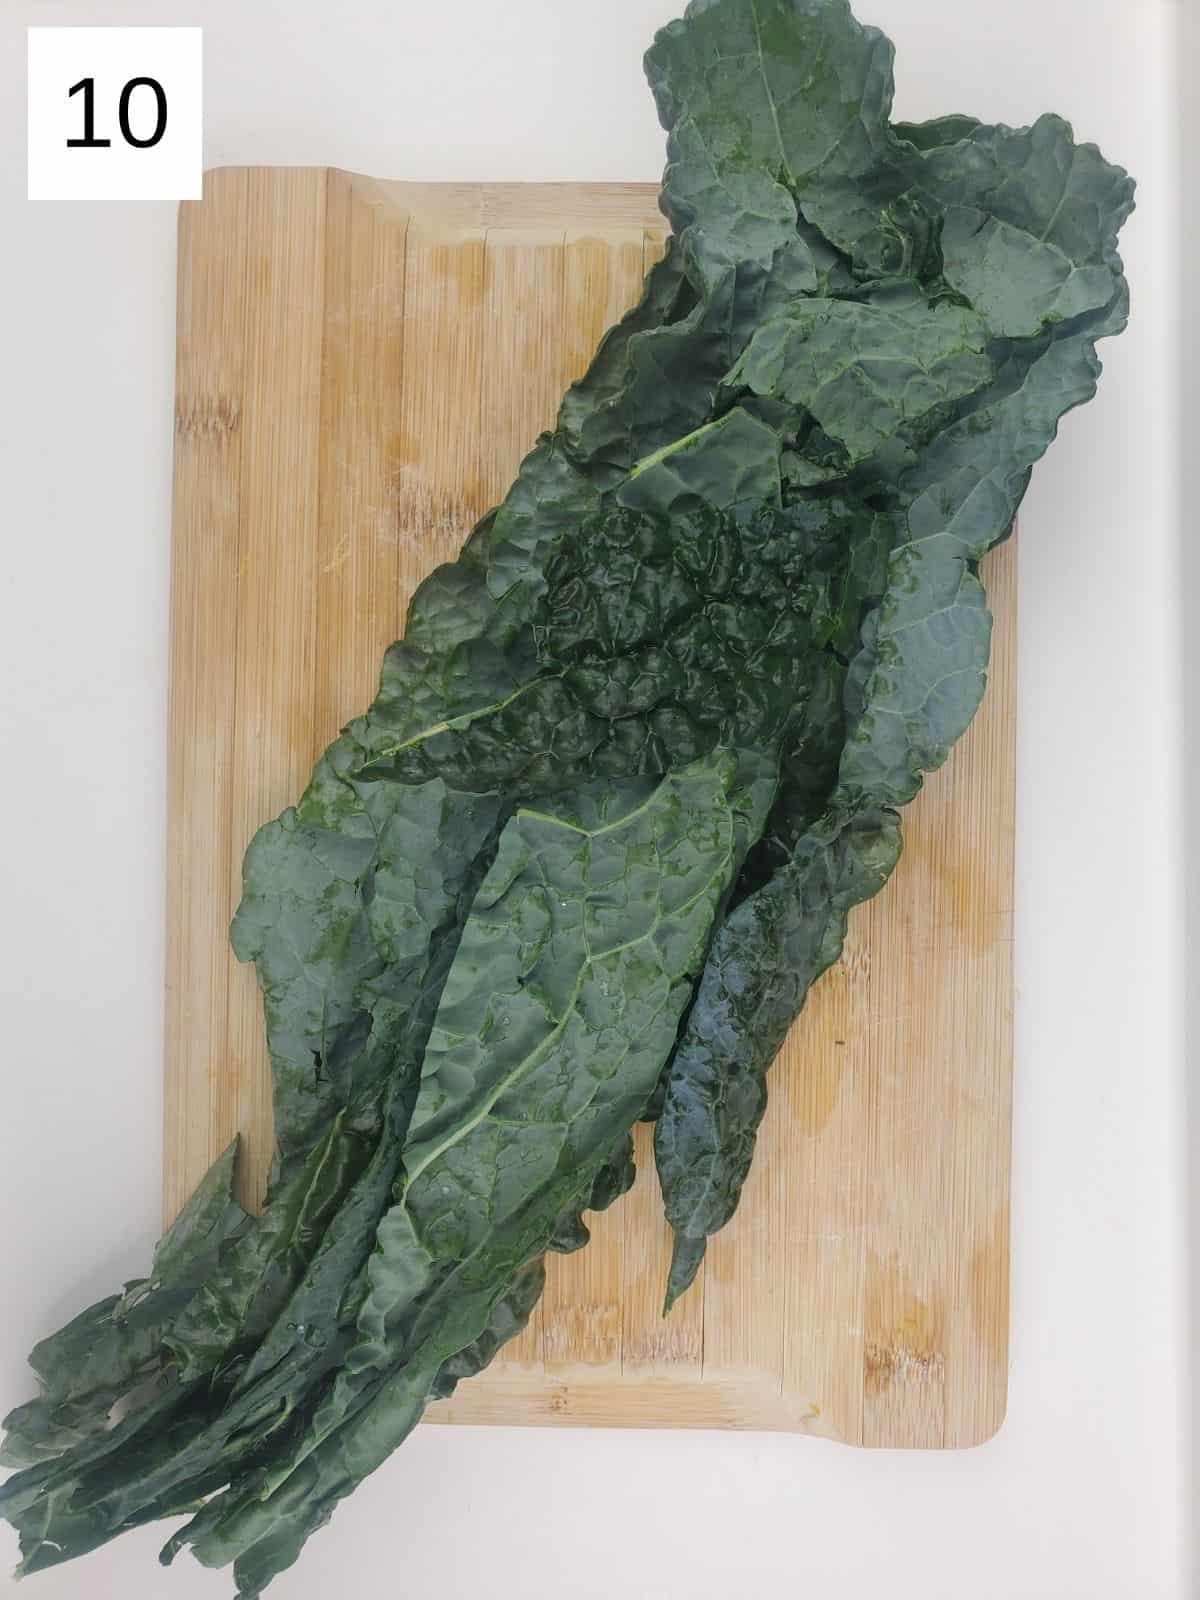 kale leaves with spines removed, on a wooden cutting board.